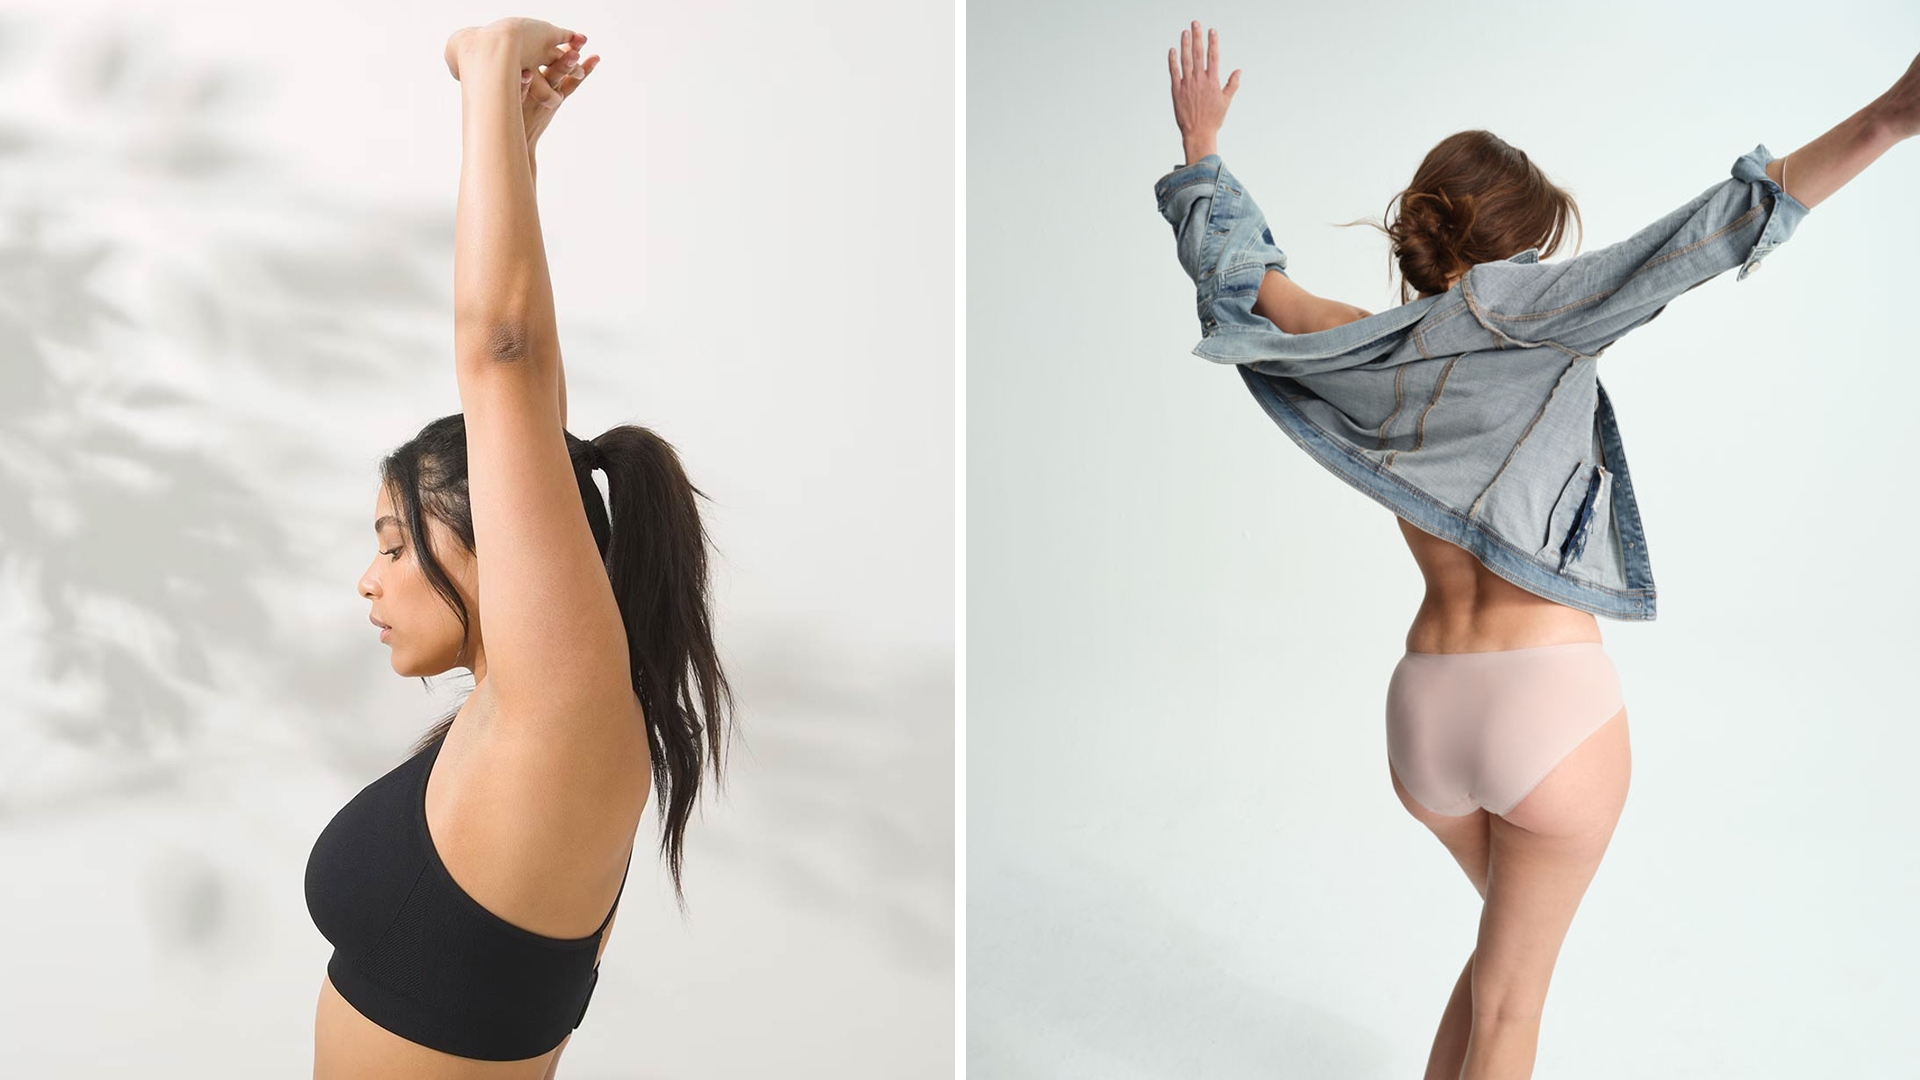 (Left) Soma<sup class=st-superscript>®</sup> model wearing a black sports bra. (Right) Soma<sup class=st-superscript>®</sup> model wearing a denim jacket and nude panties.